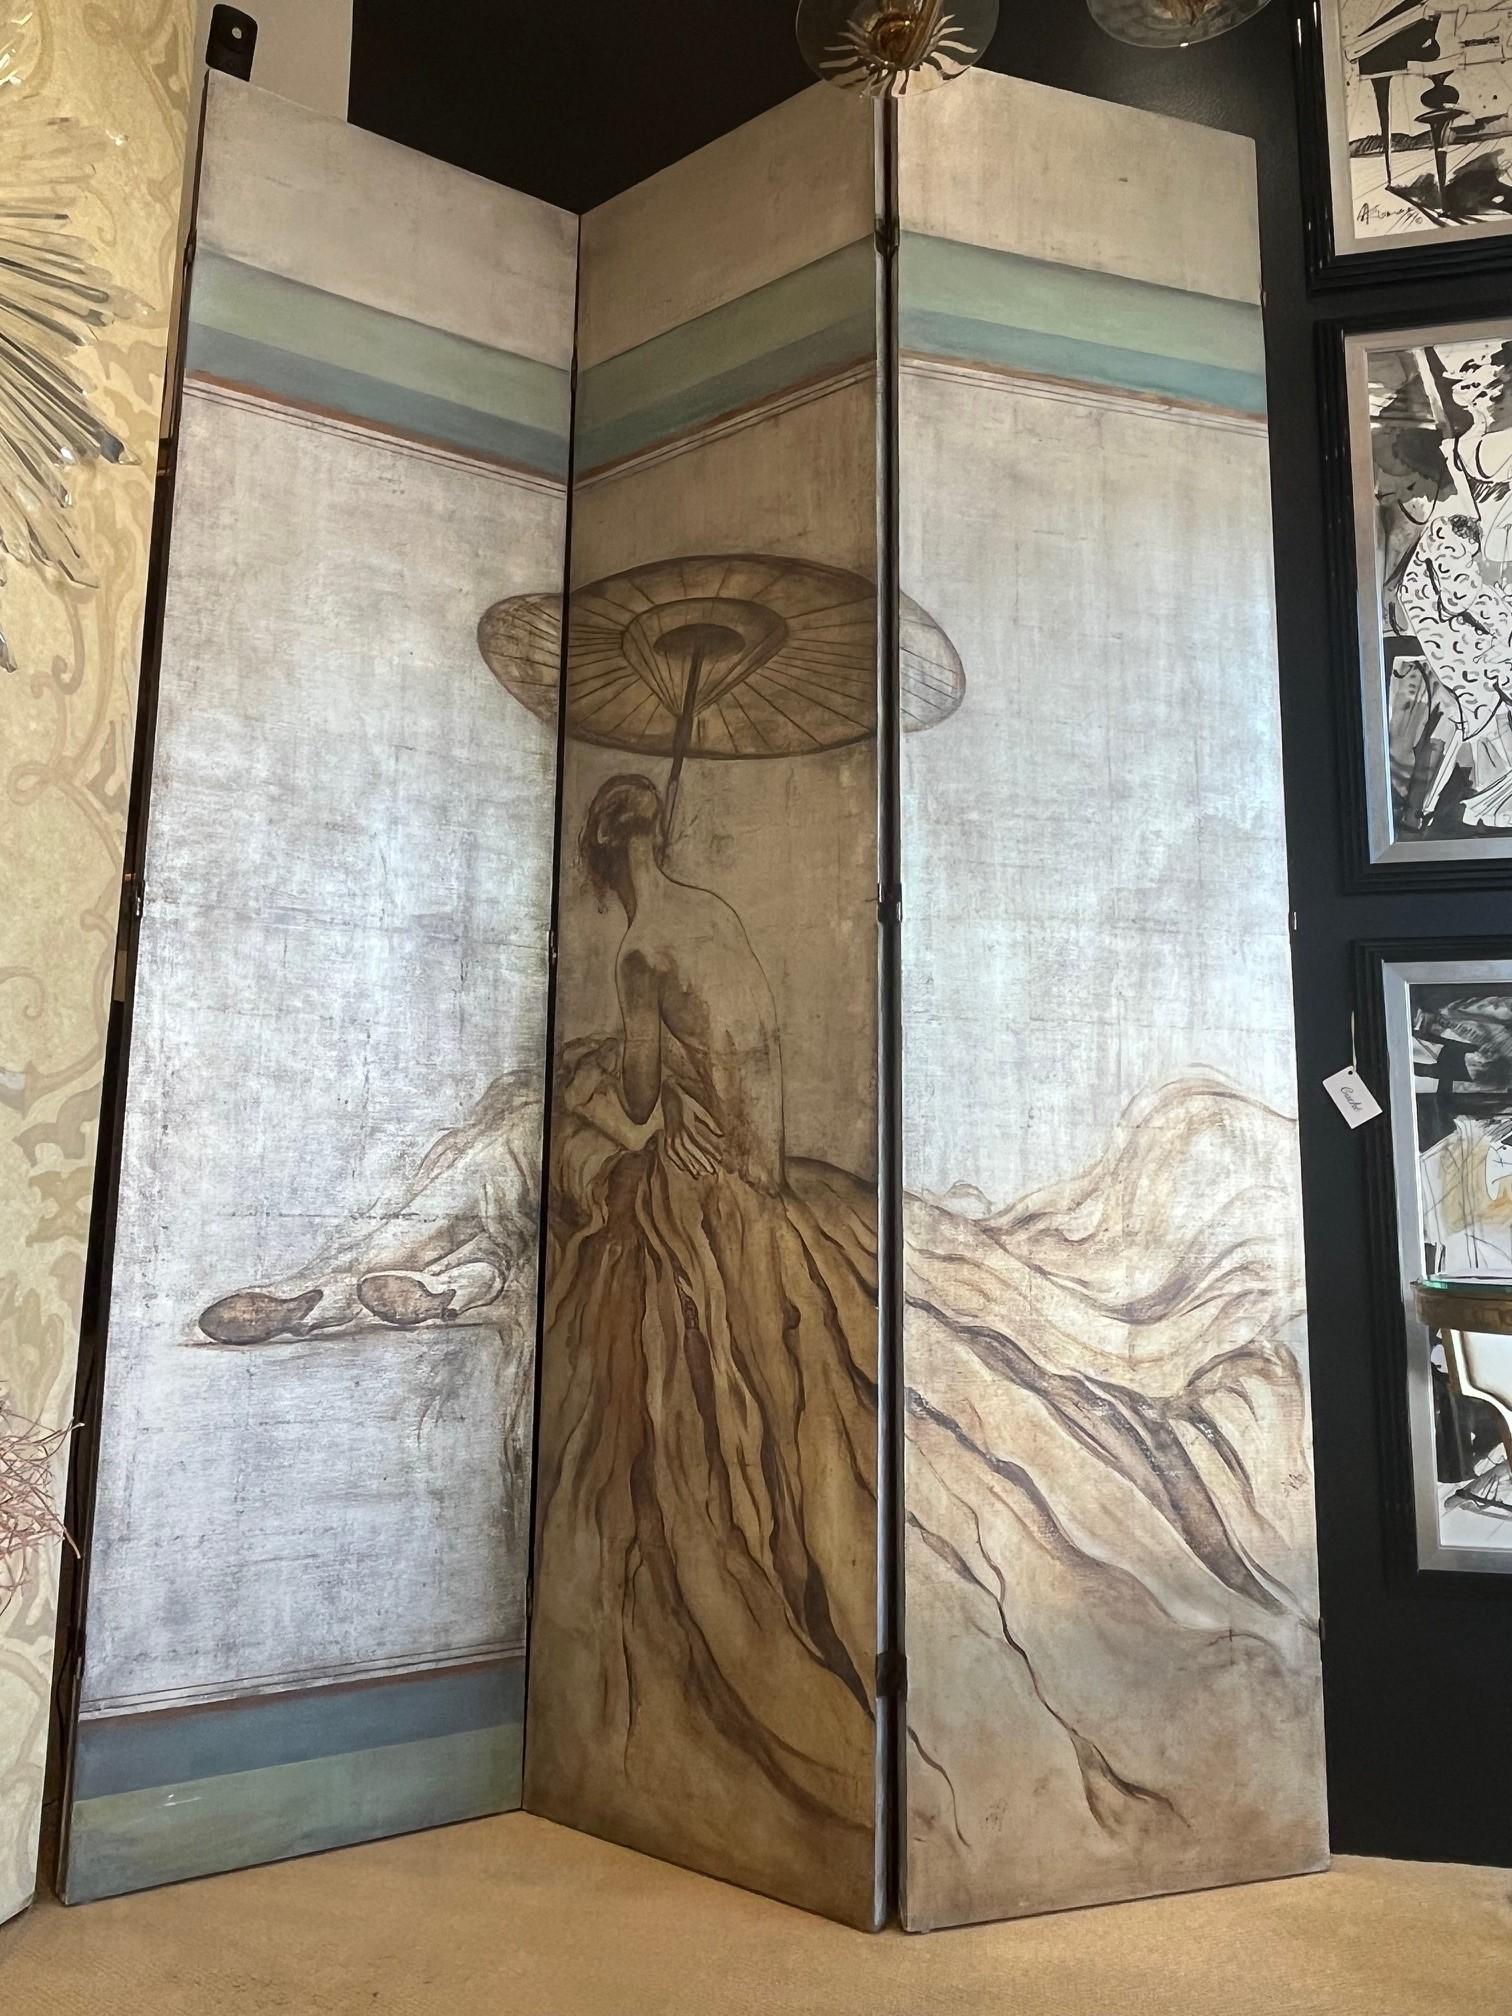 Vintage Five Panels Hand Painted Folding Silver Leaf Screen, Reclining Female with Paper Umbrella is Designed by Jacques Grange
Painted Acrylic on Canvas Mounted on Wood, Each Panel Measures 23